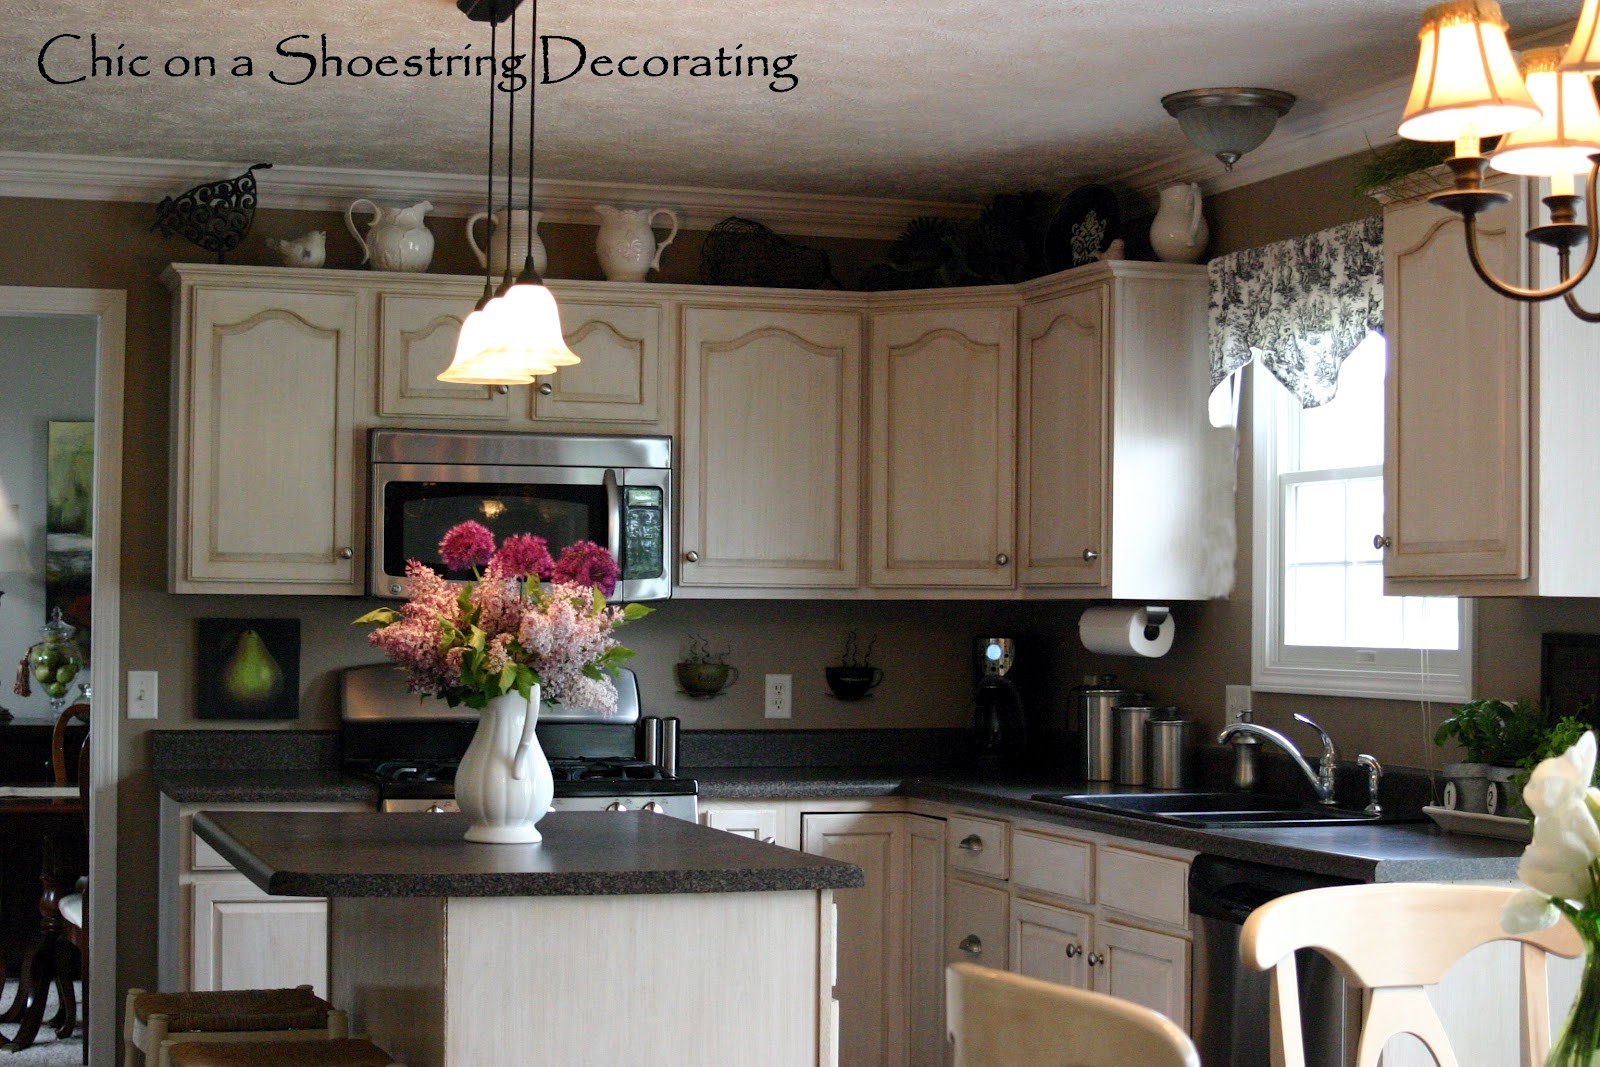 Top Of Kitchen Cabinet Decorations
 Chic on a Shoestring Decorating My Spring Kitchen